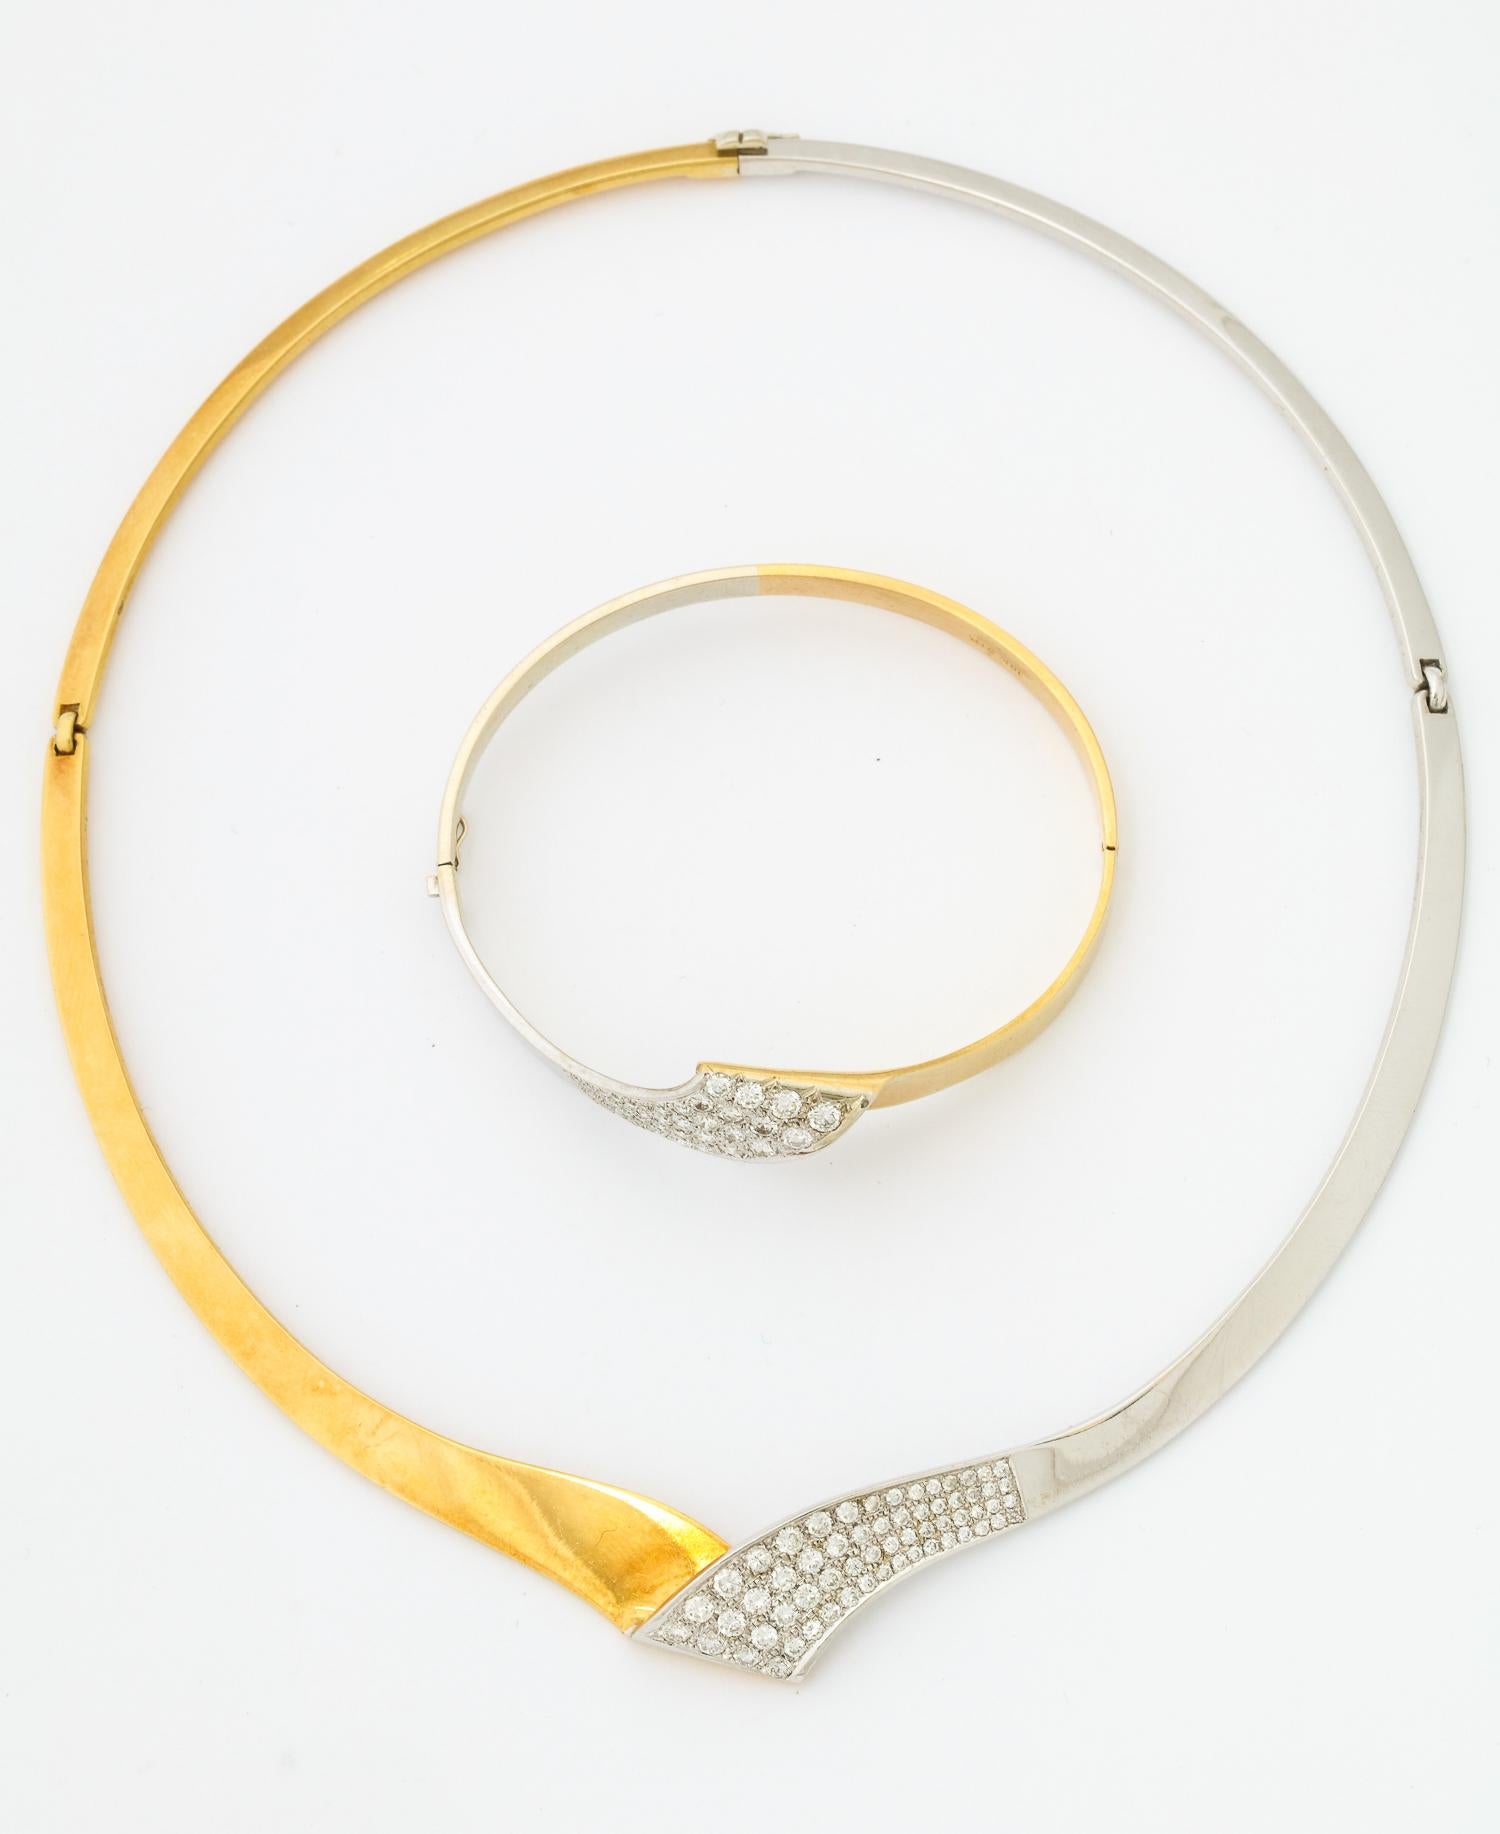 One Ladies Ultra Chic Collar Necklace With Matching Bangle Bracelet Crafted In White And Yellow 18kt Gold. Ensemble Is Embellished With Approximately 2.50 Cts Of Diamond Total Weight. All Diamonds Are Full Cut And Are Very High Quality.Created In